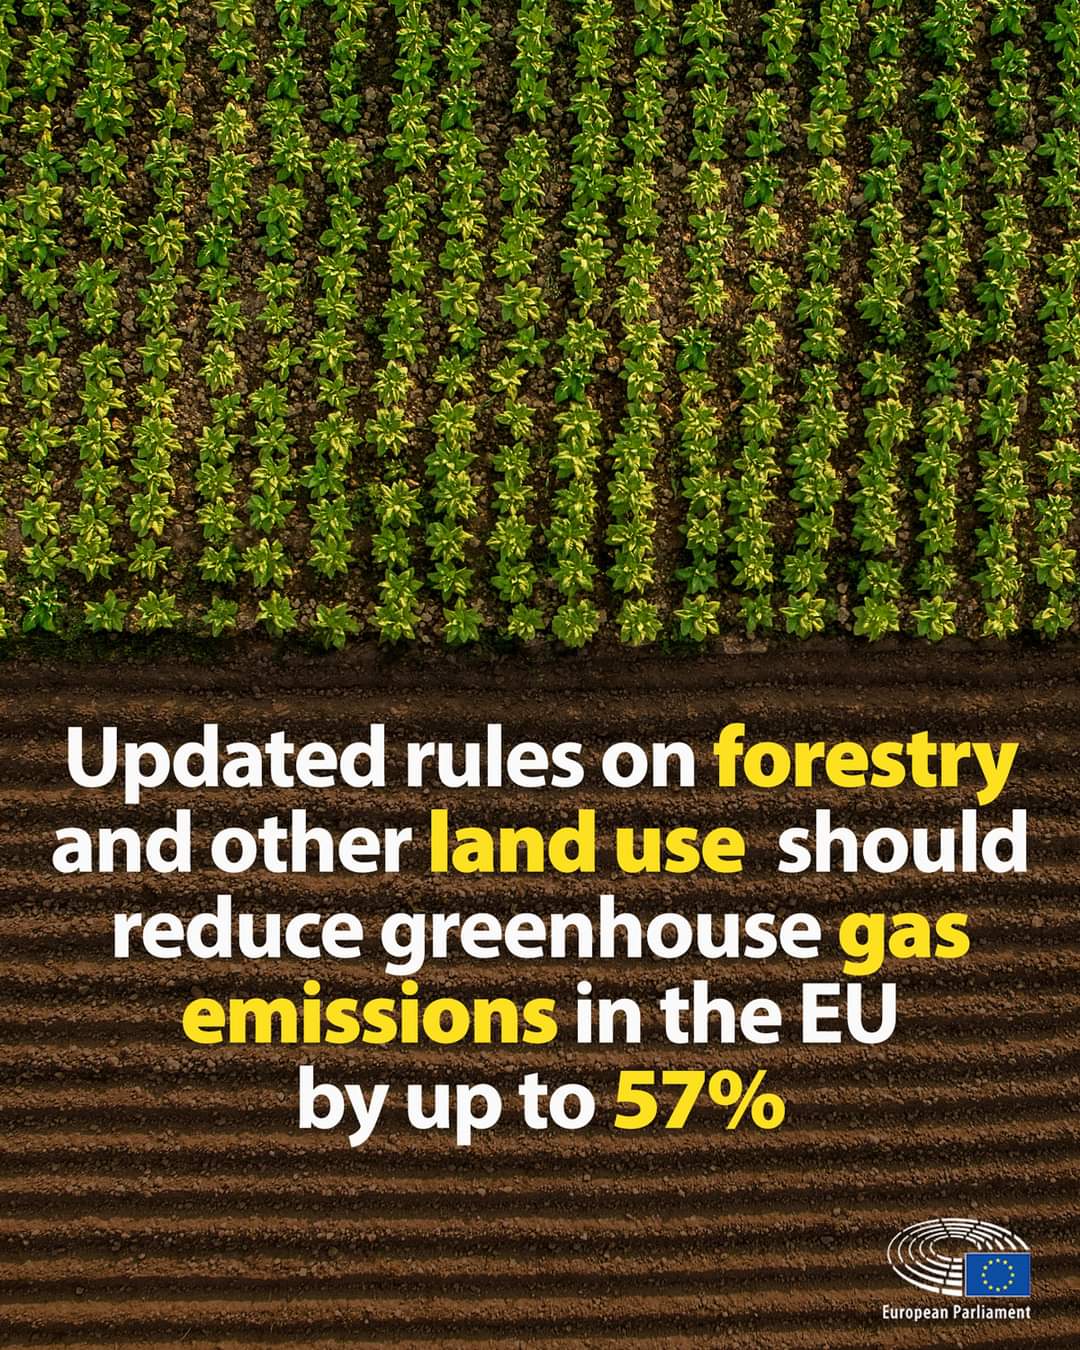 Reduce greenhouse gas emissions in the EU